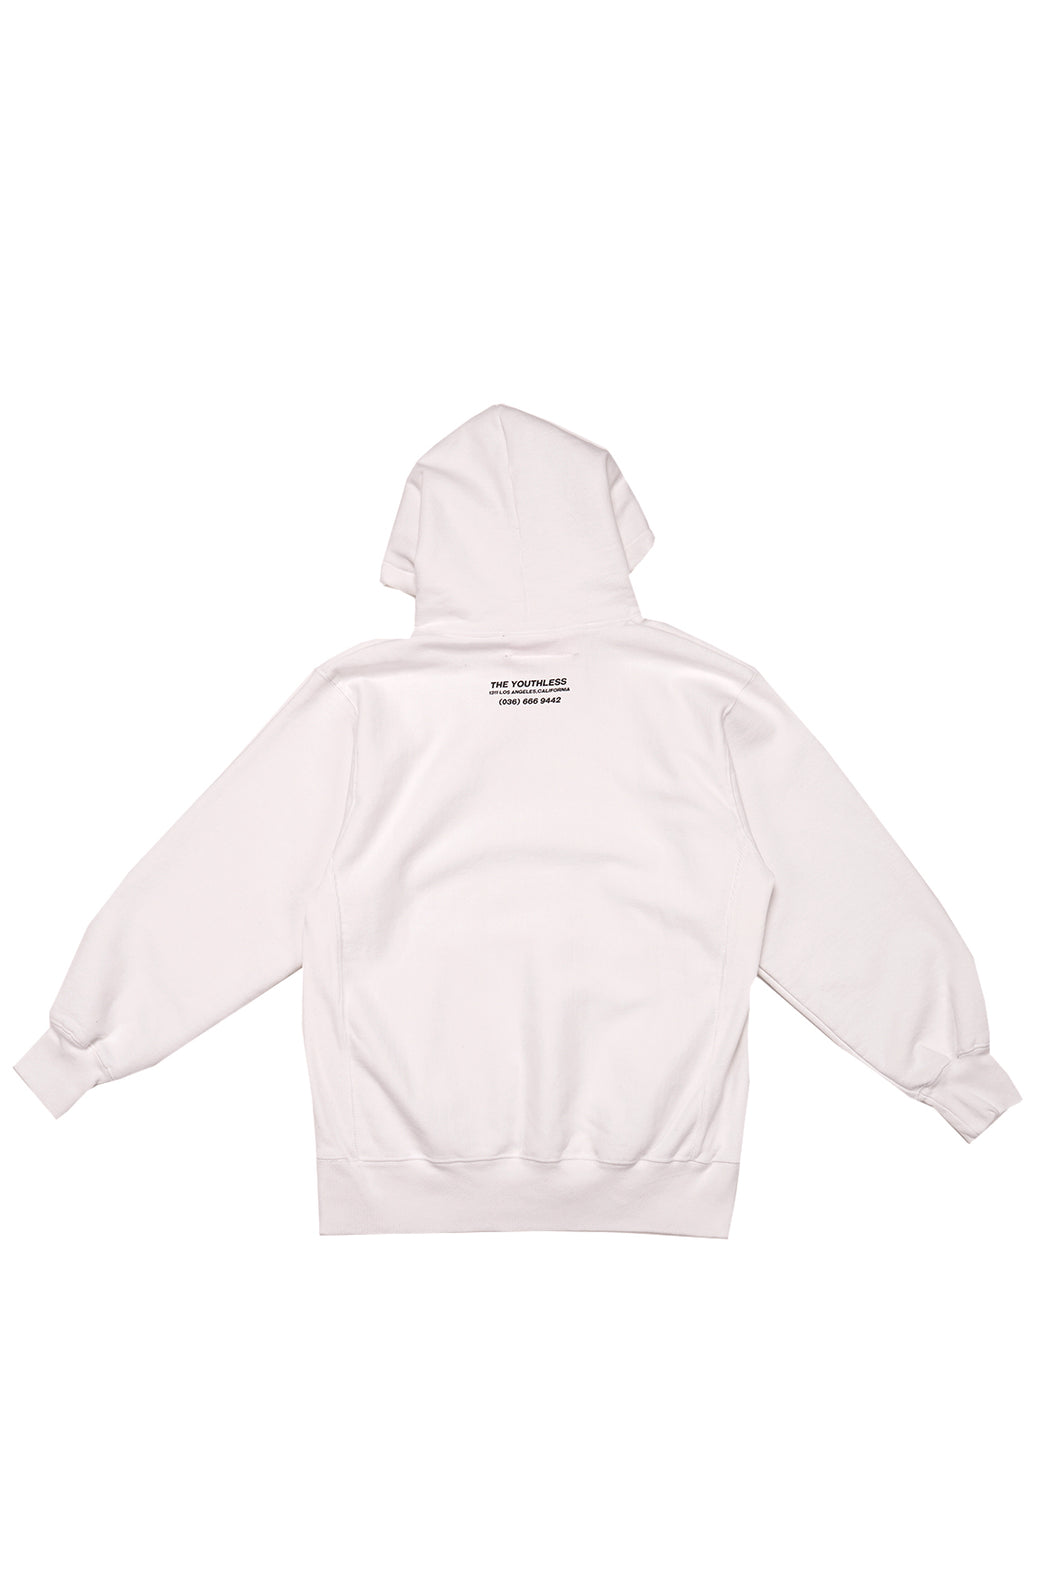 Adults Only Sweatshirt - White